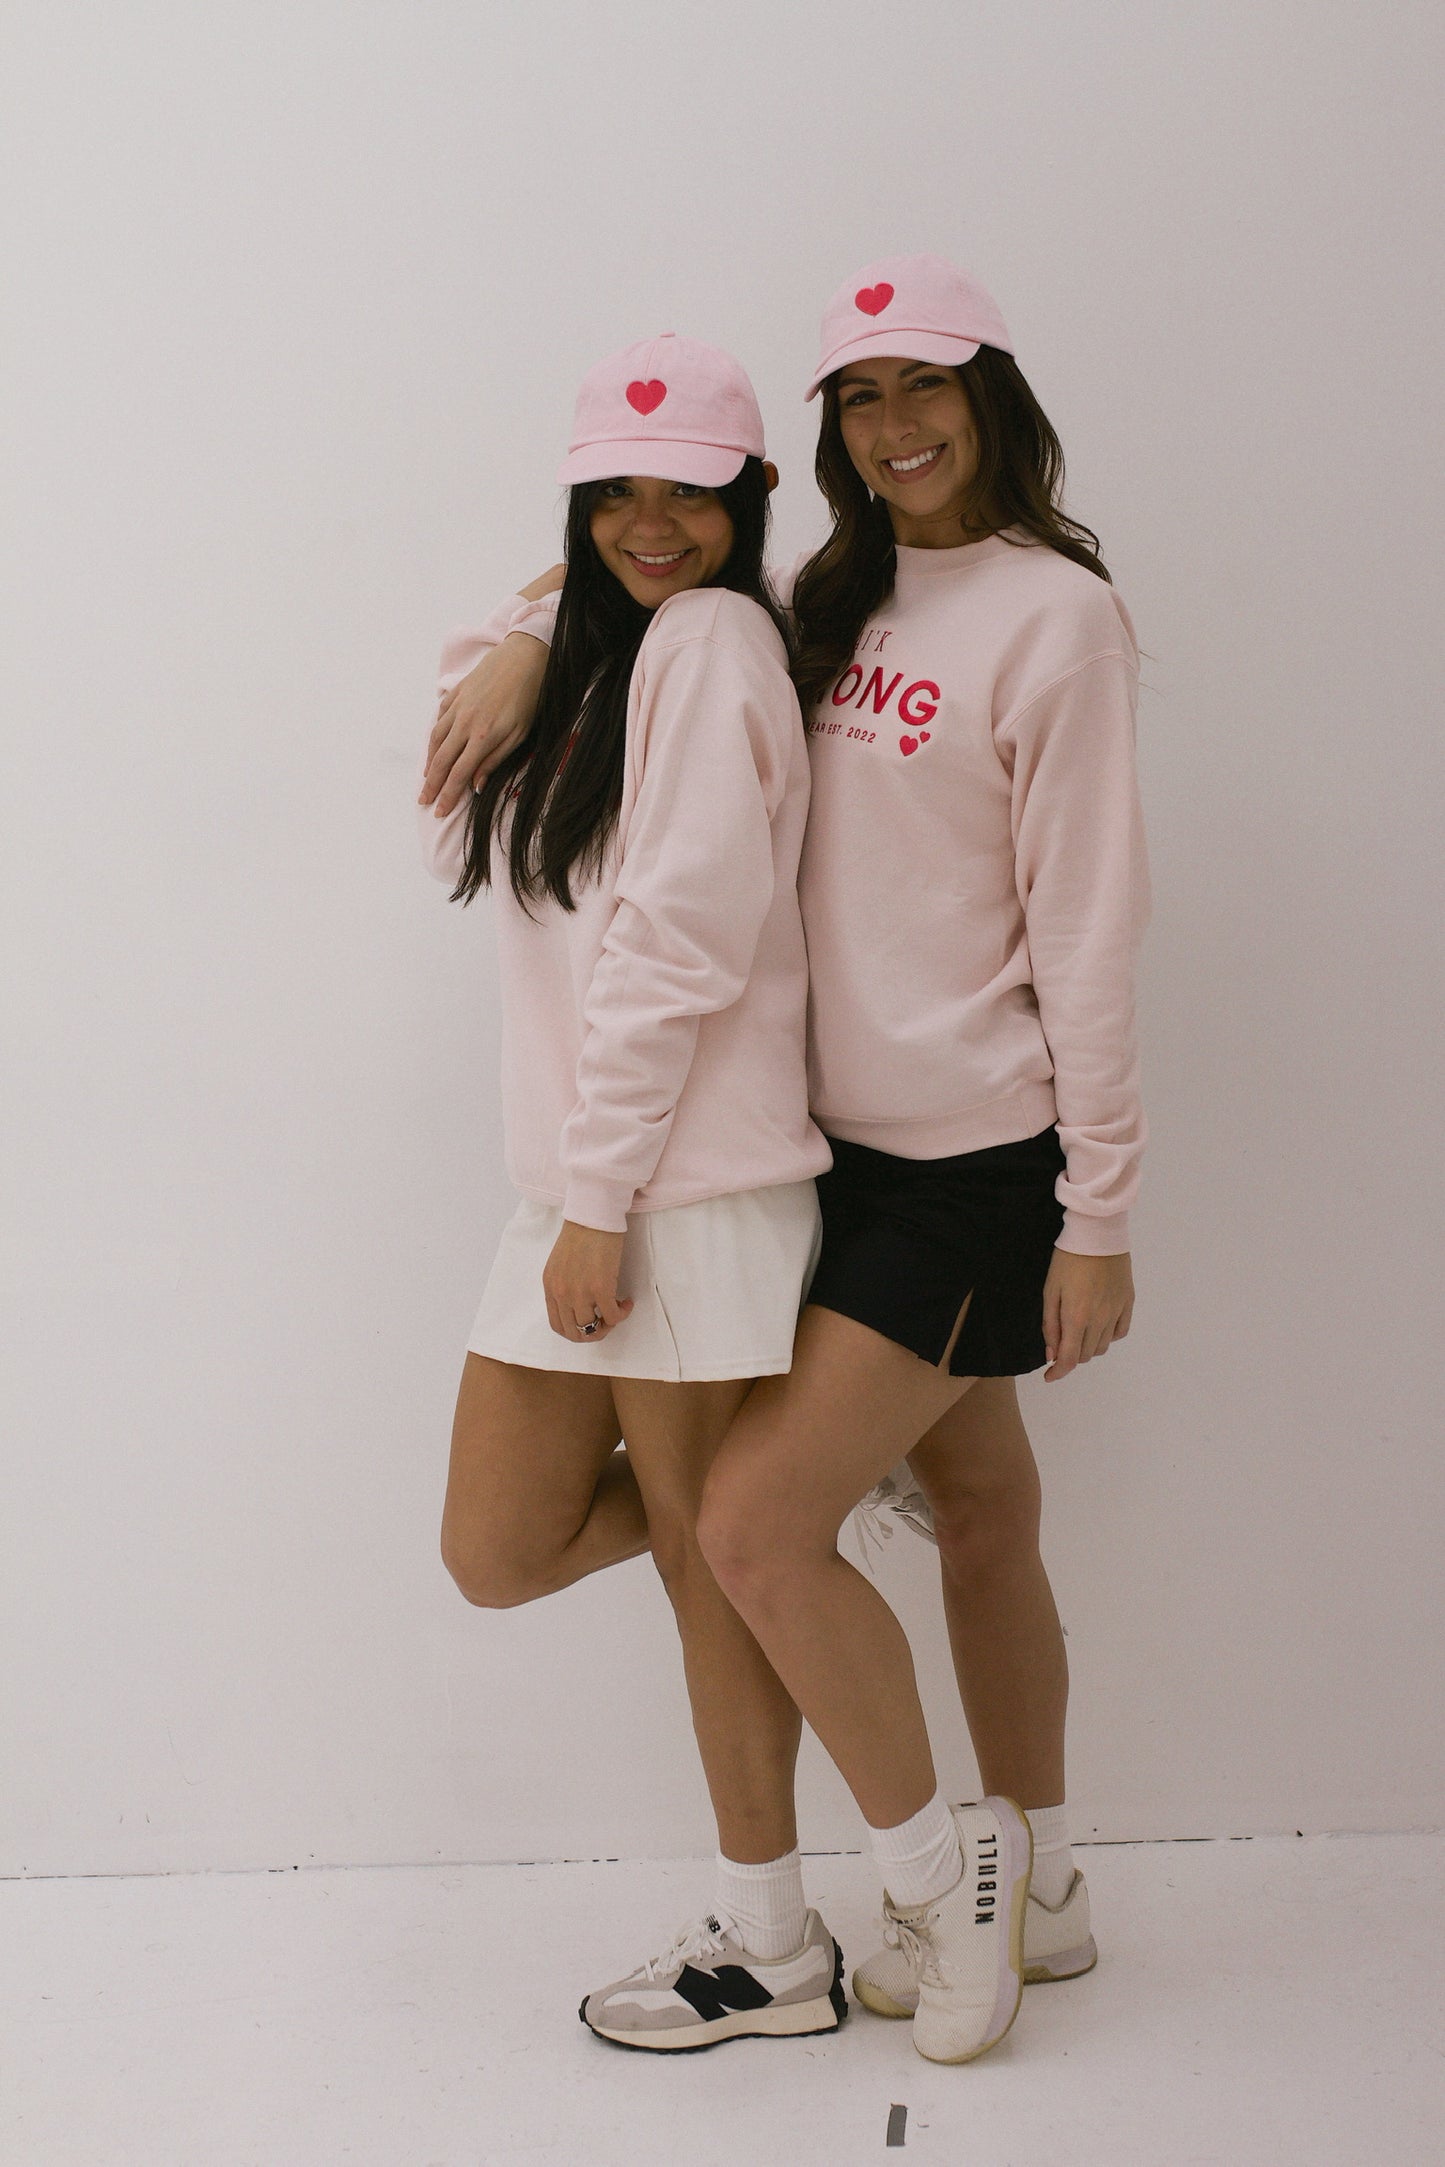 PINK STRONG CREW NECK